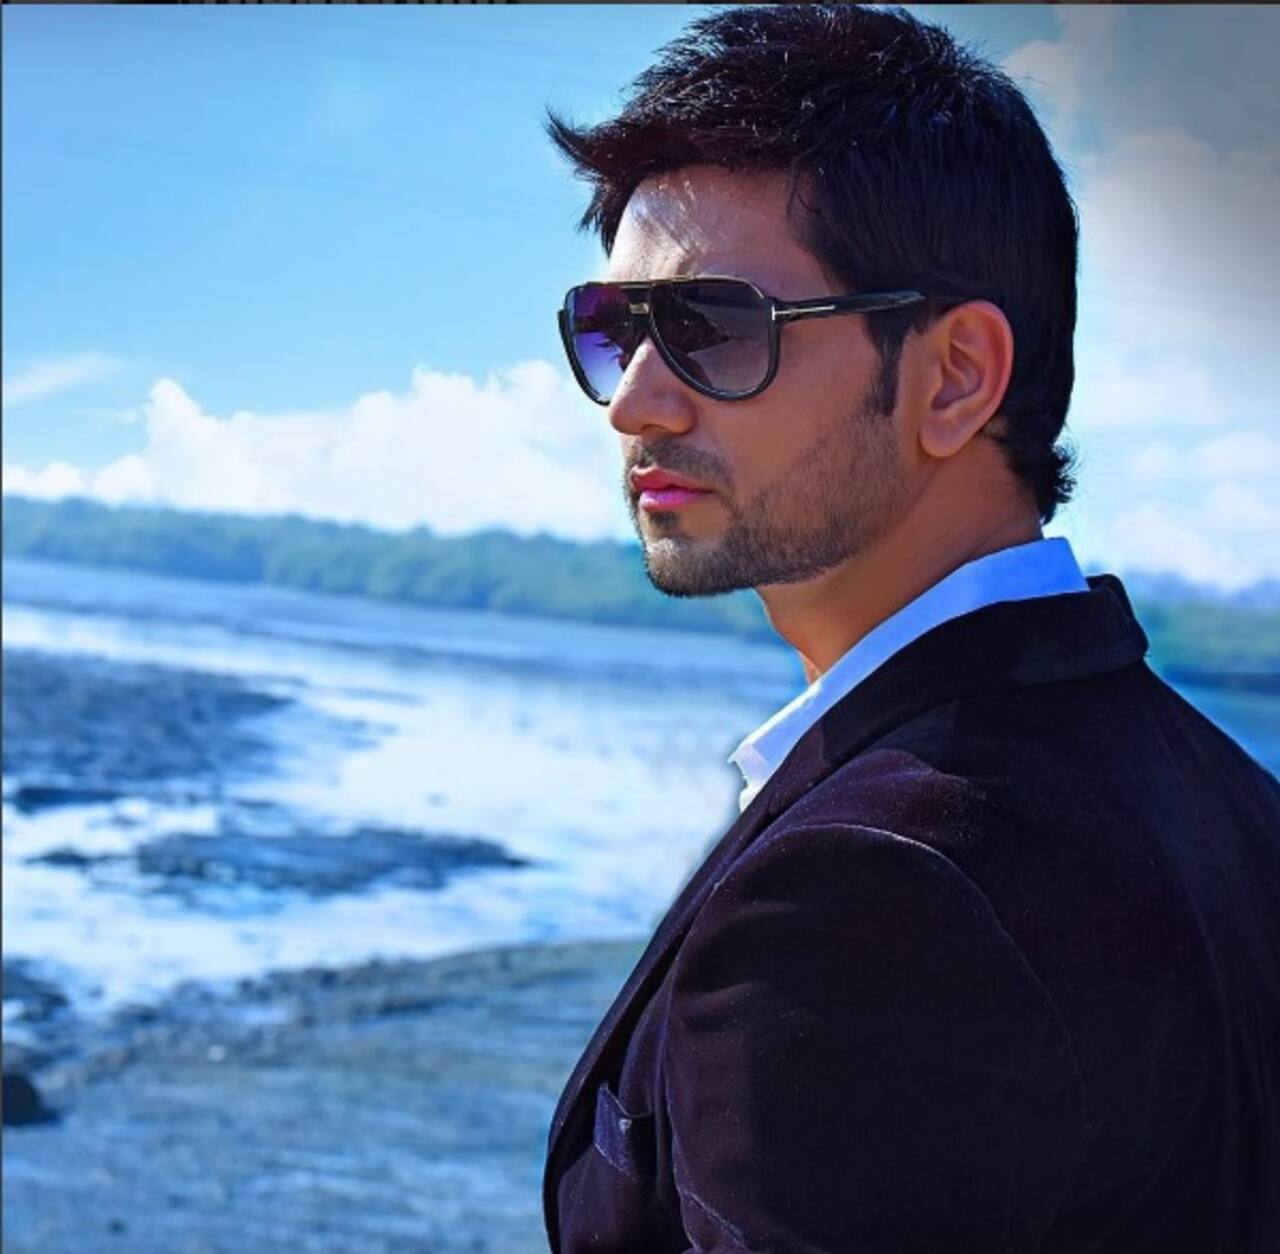 Shakti Arora birthday special: 5 facts about the handsome actor that will surprise you!